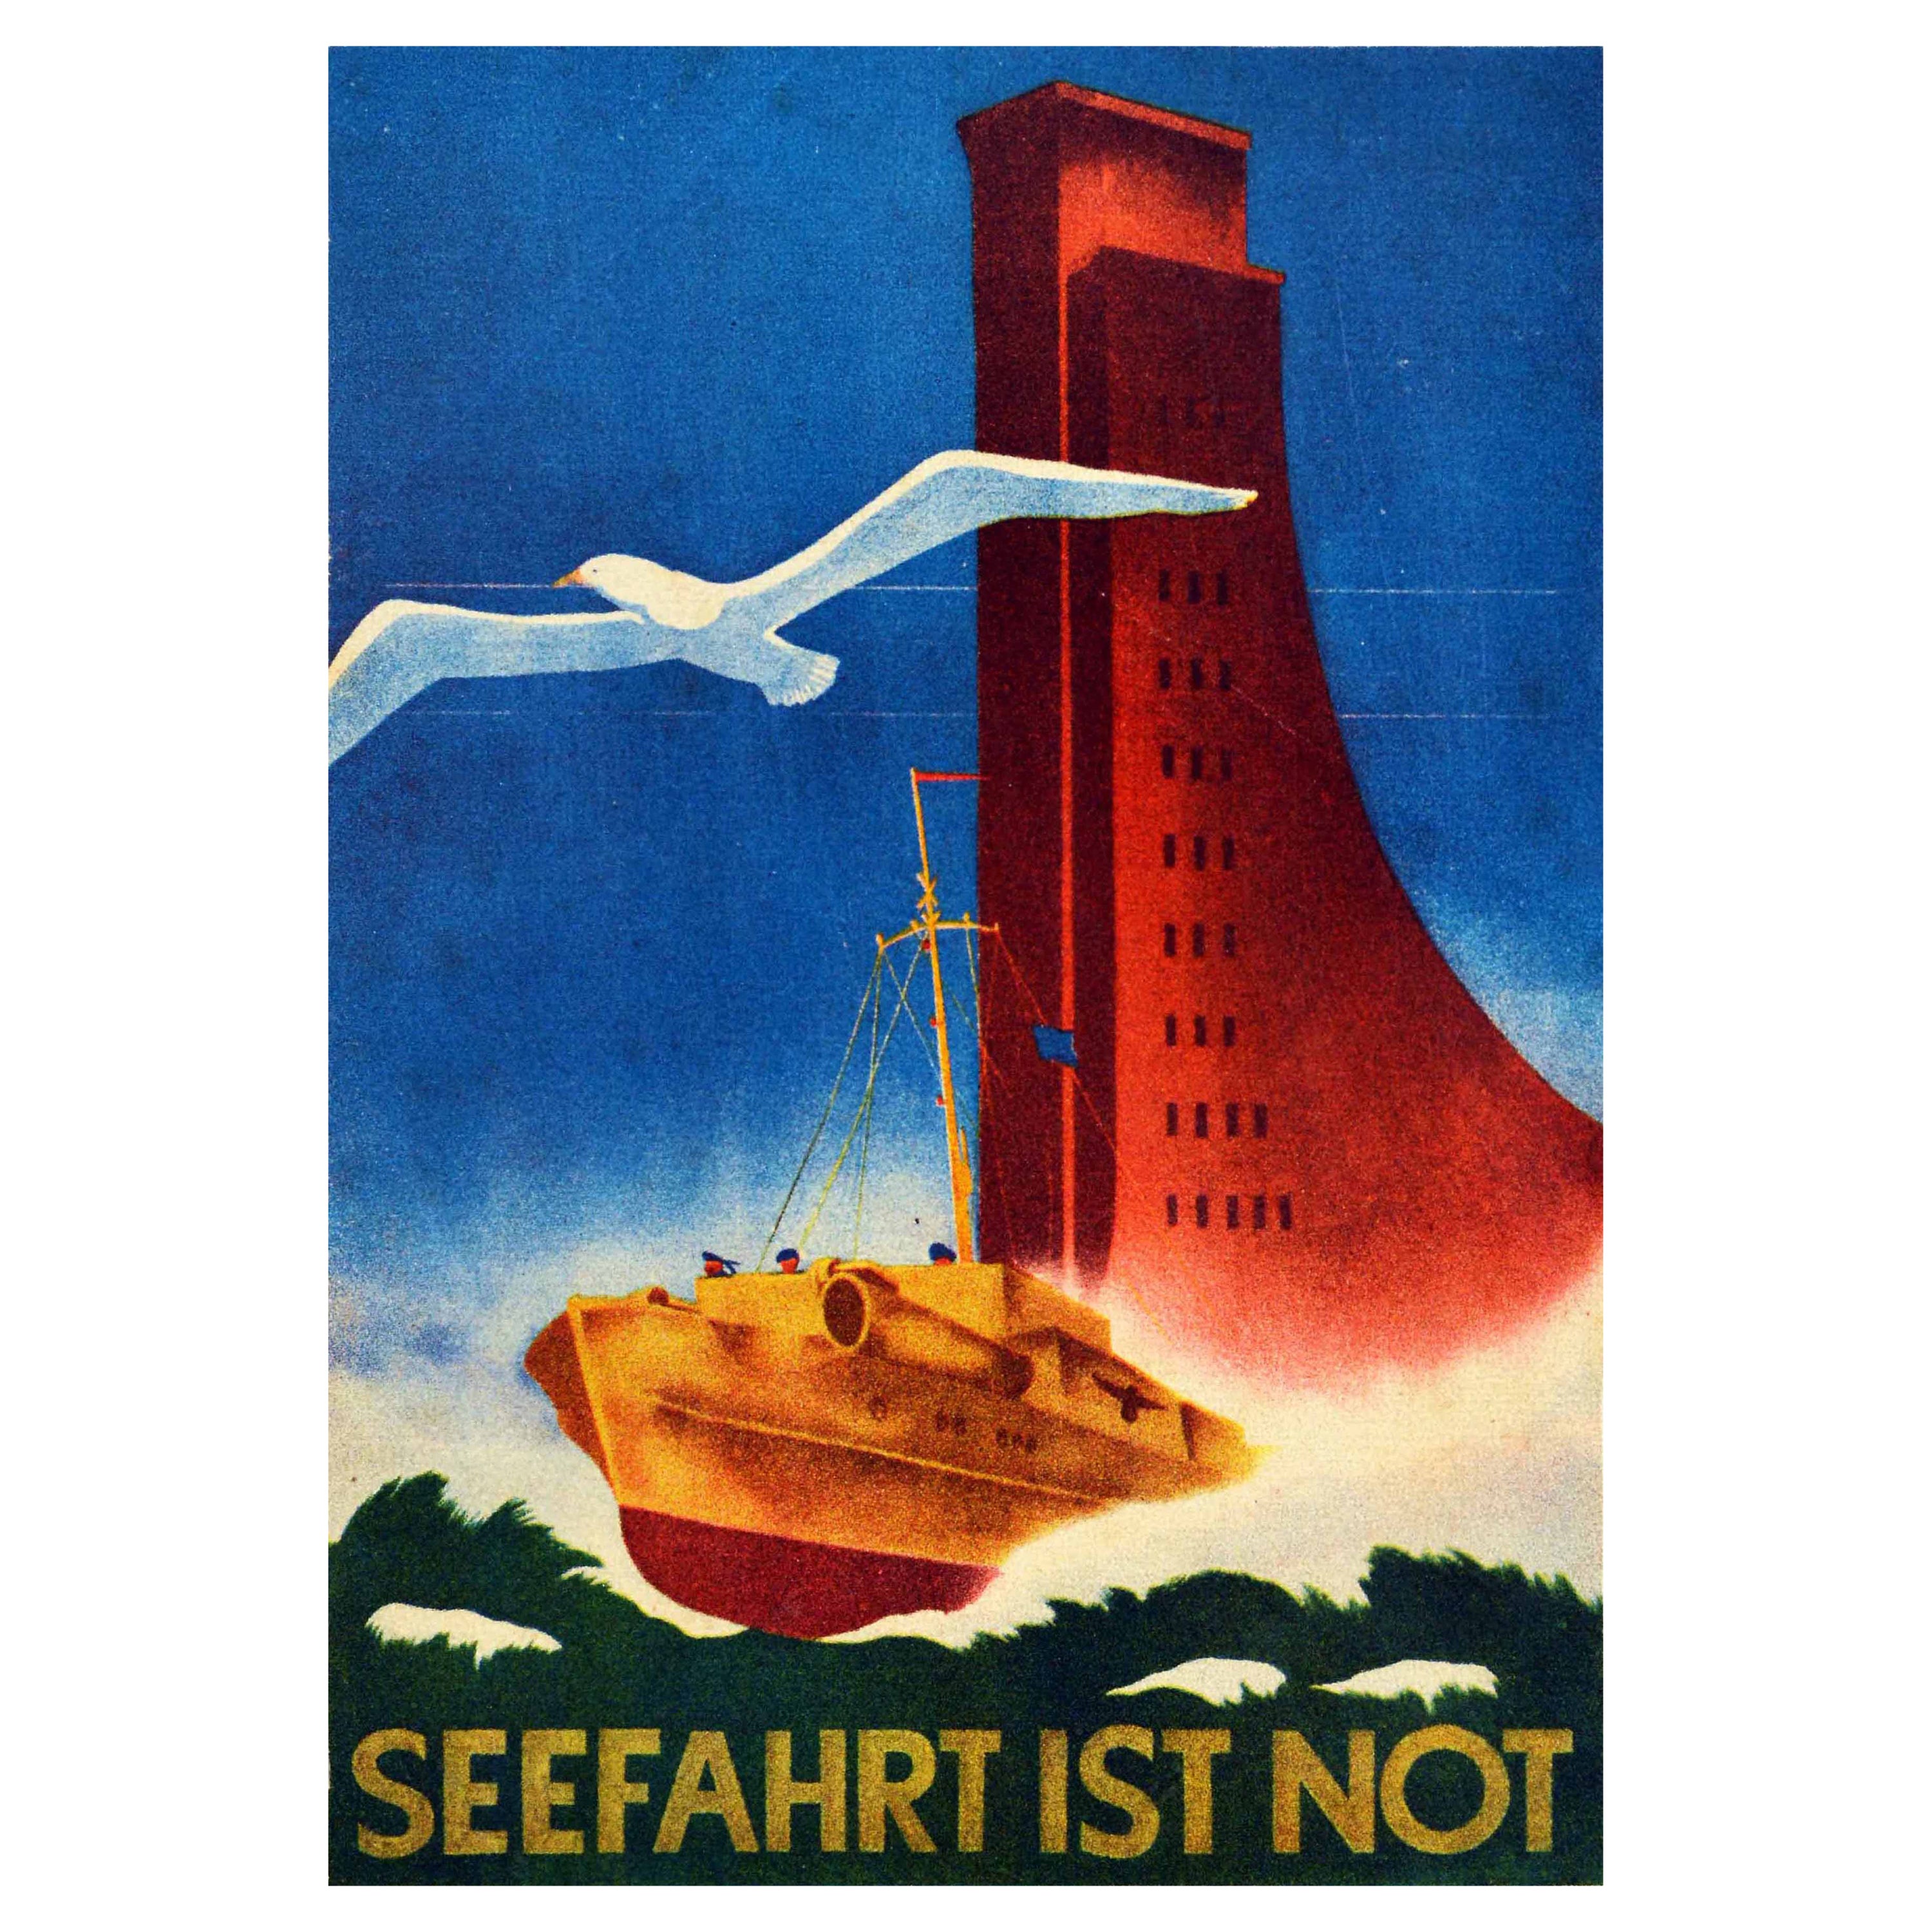 Original Vintage Seefahrt Ist Not Poster Sea Quote Navy Shipping Is A Necessity For Sale